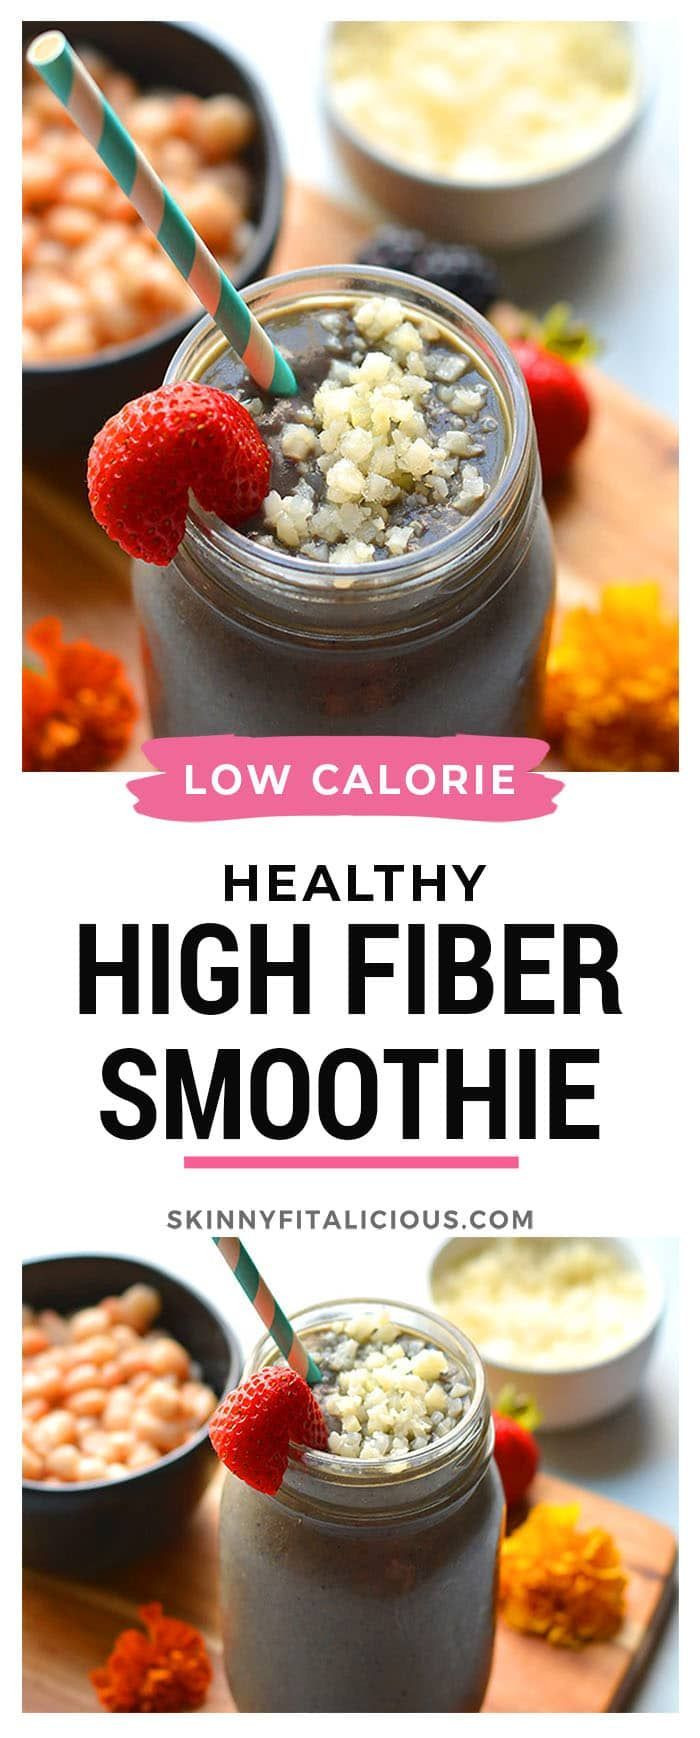 High Fiber Smoothie Recipes Weight Loss
 High Fiber Protein Smoothie in 2020